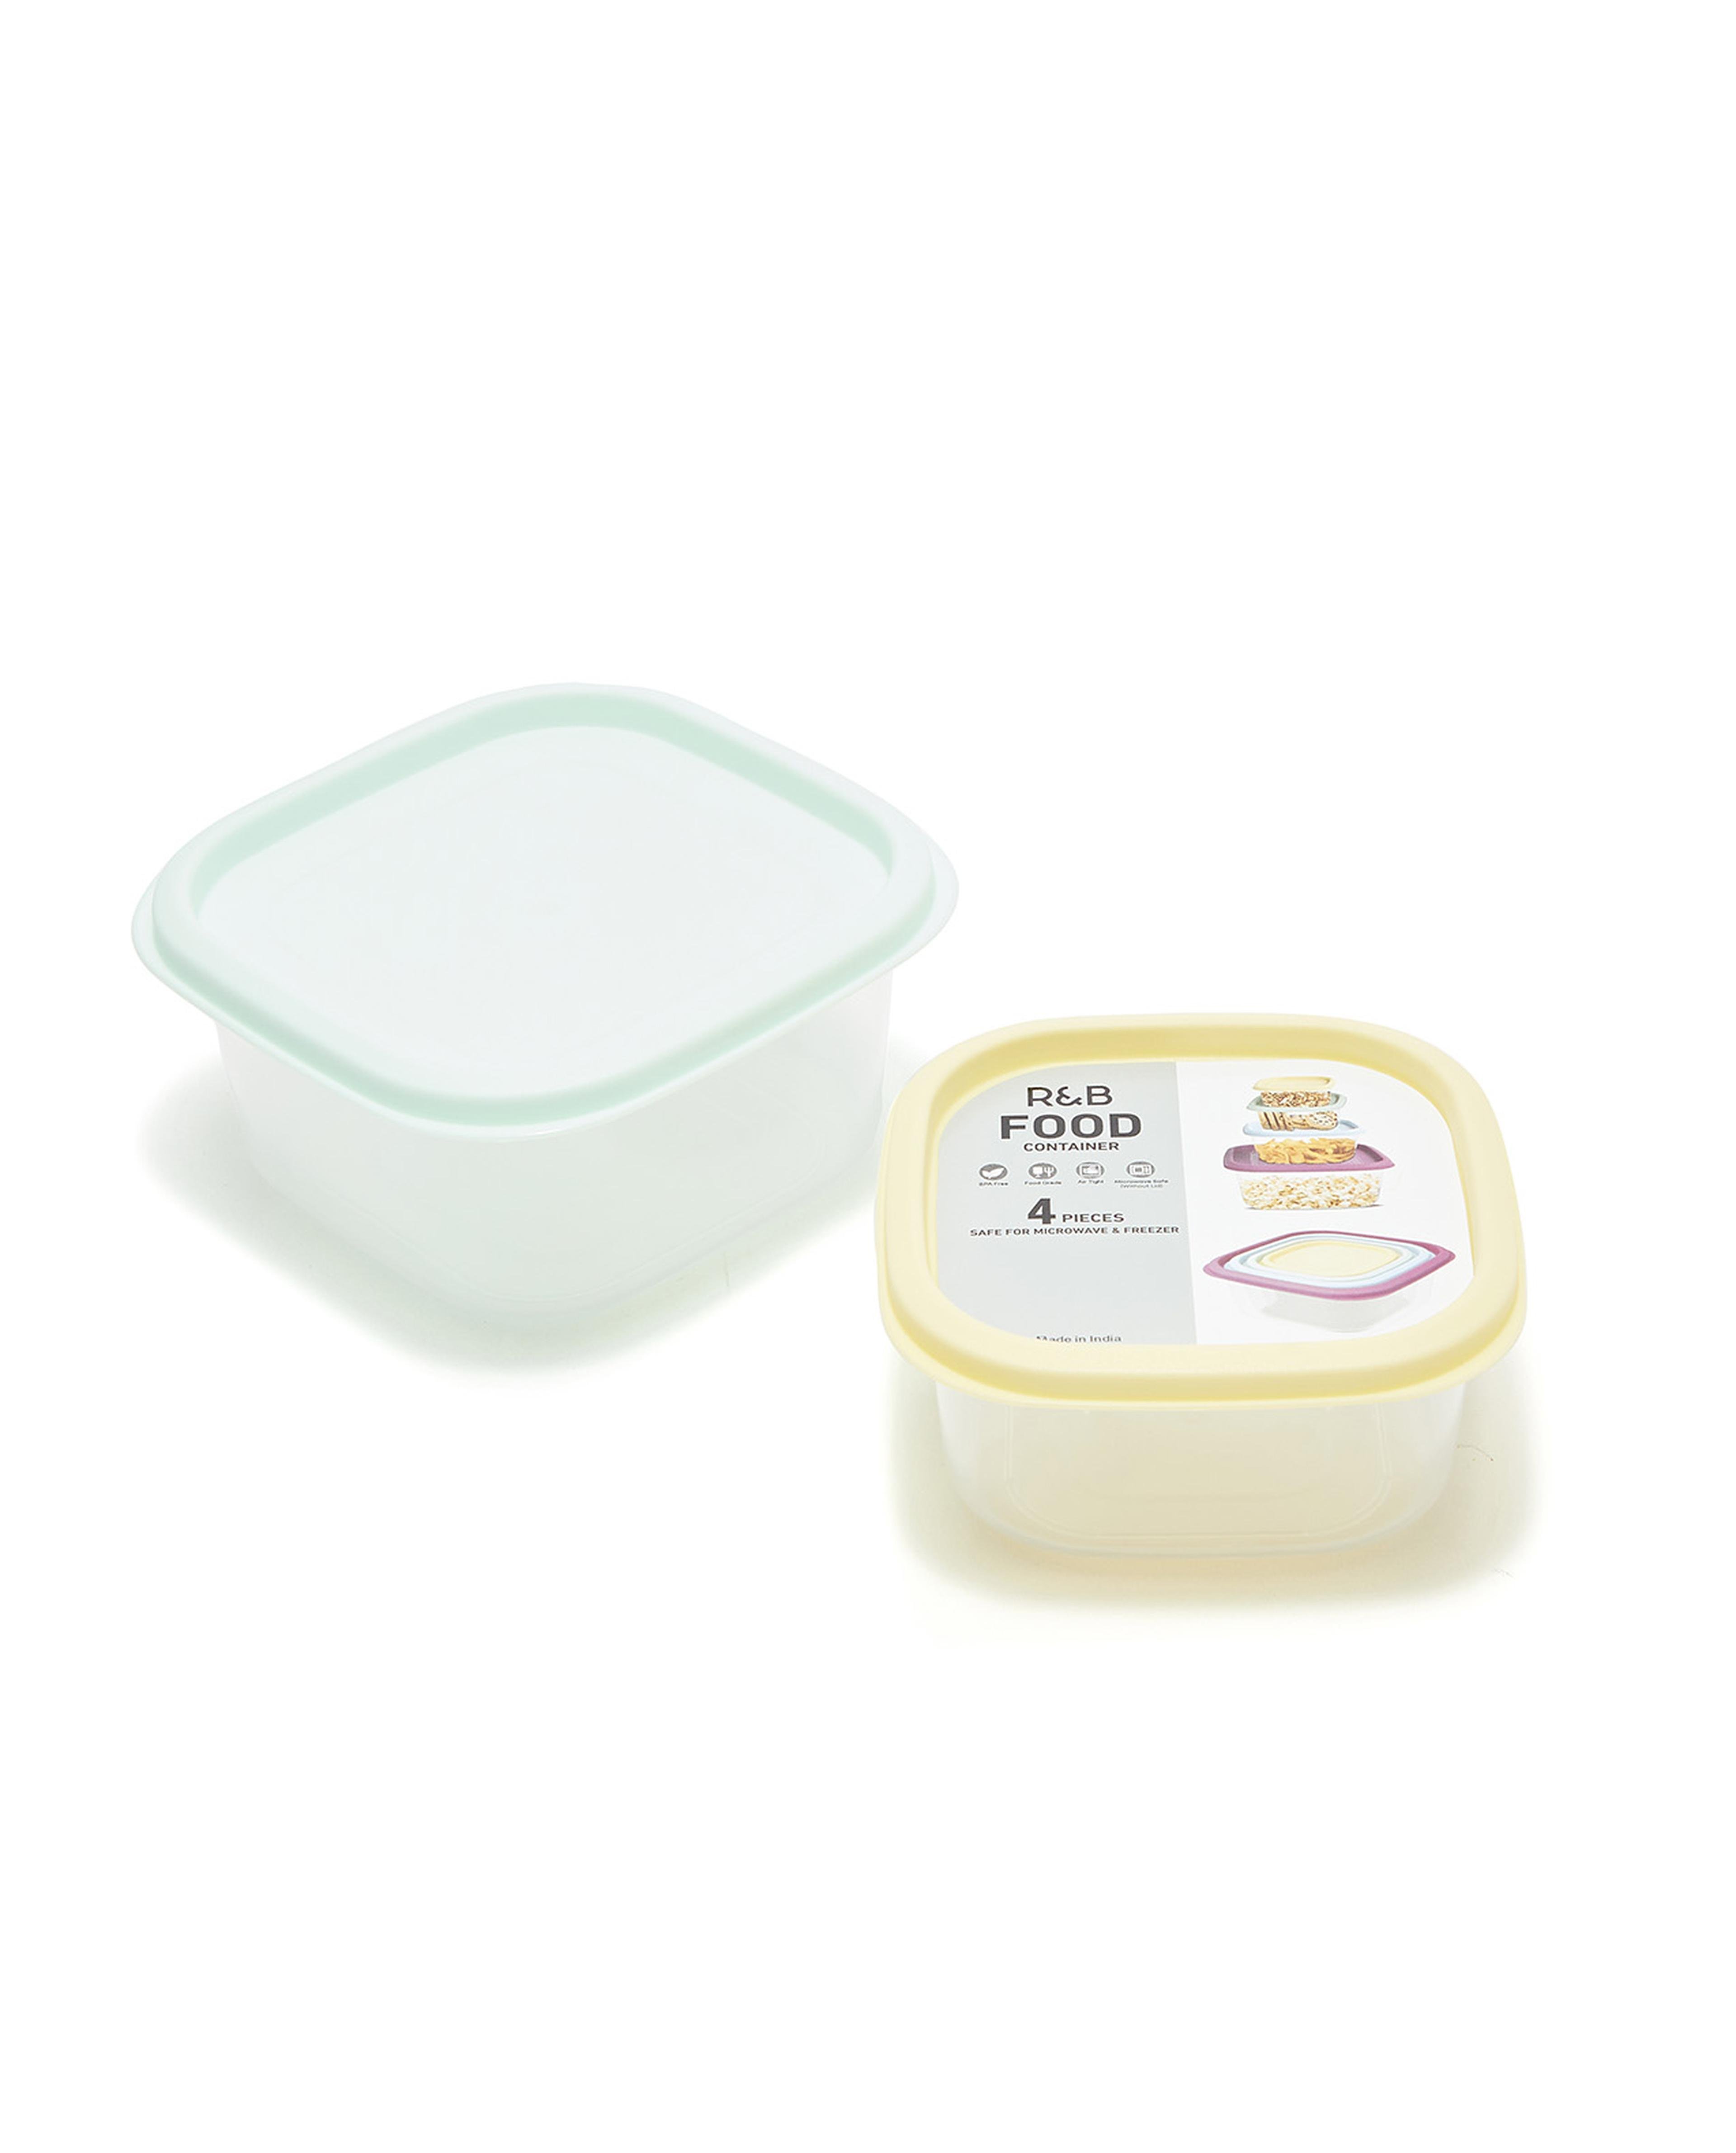 Pack of 4 Food Containers